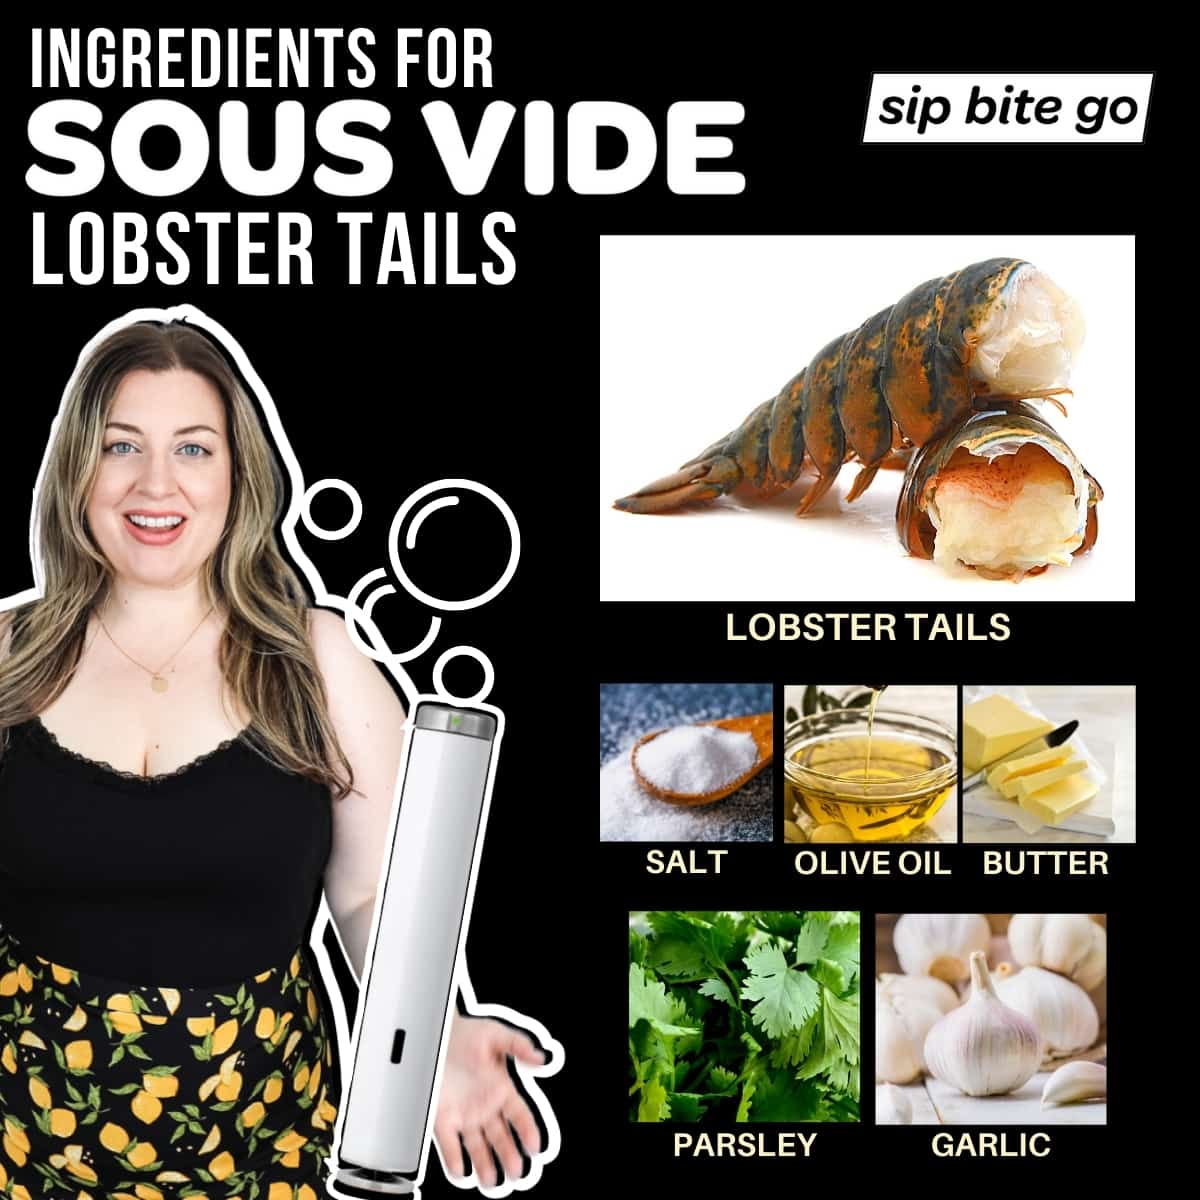 Ingredients for sous vide lobster tail recipe infographic chart with joule sous vide machine and lobster tails salt butter olive oil parsley and garlic captions.